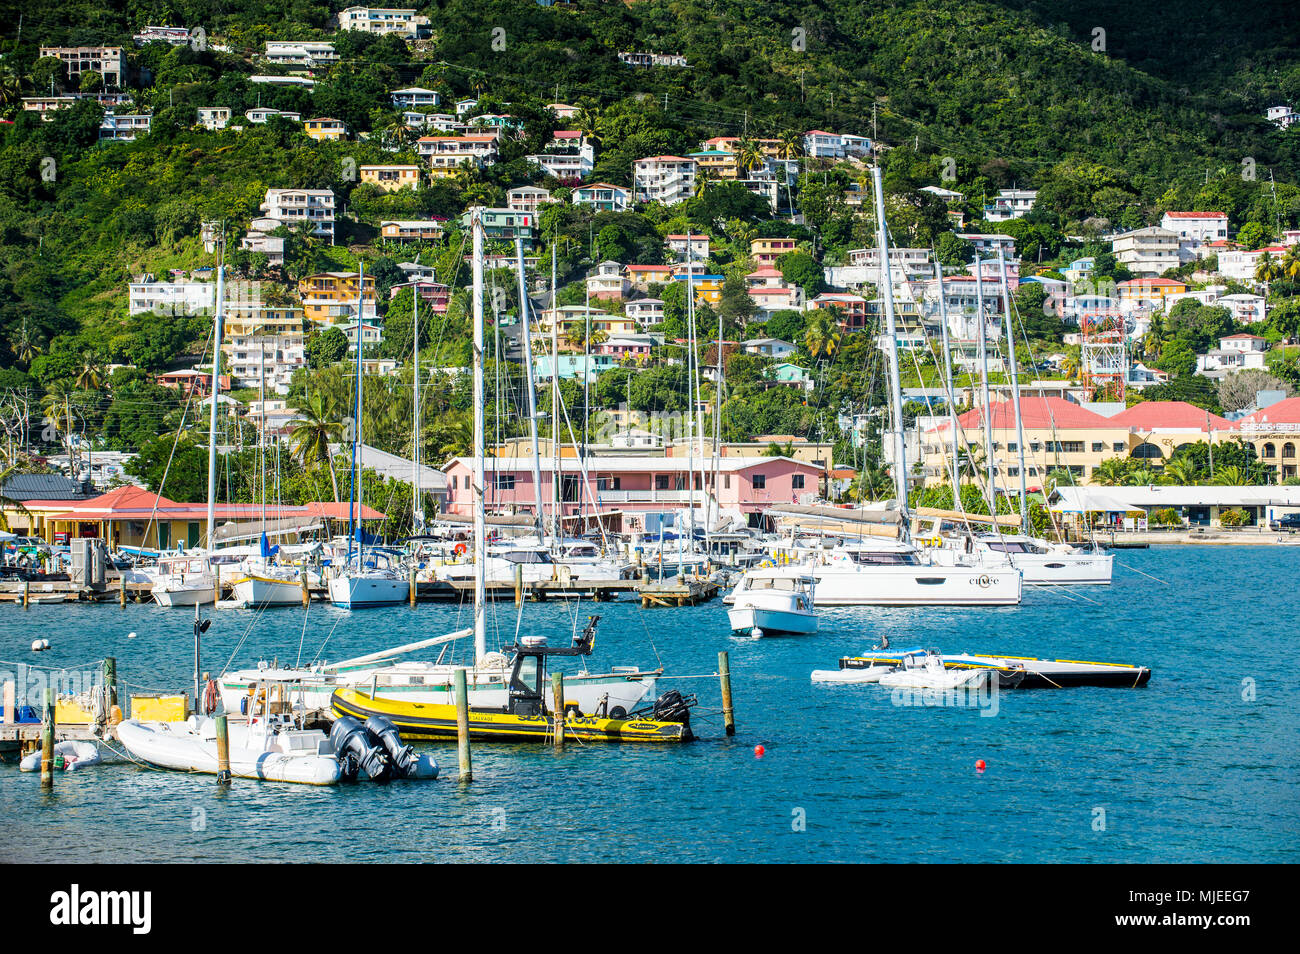 Charlotte Amalie capital of St. Thomas seen from the ocean, US Virgin Islands Stock Photo